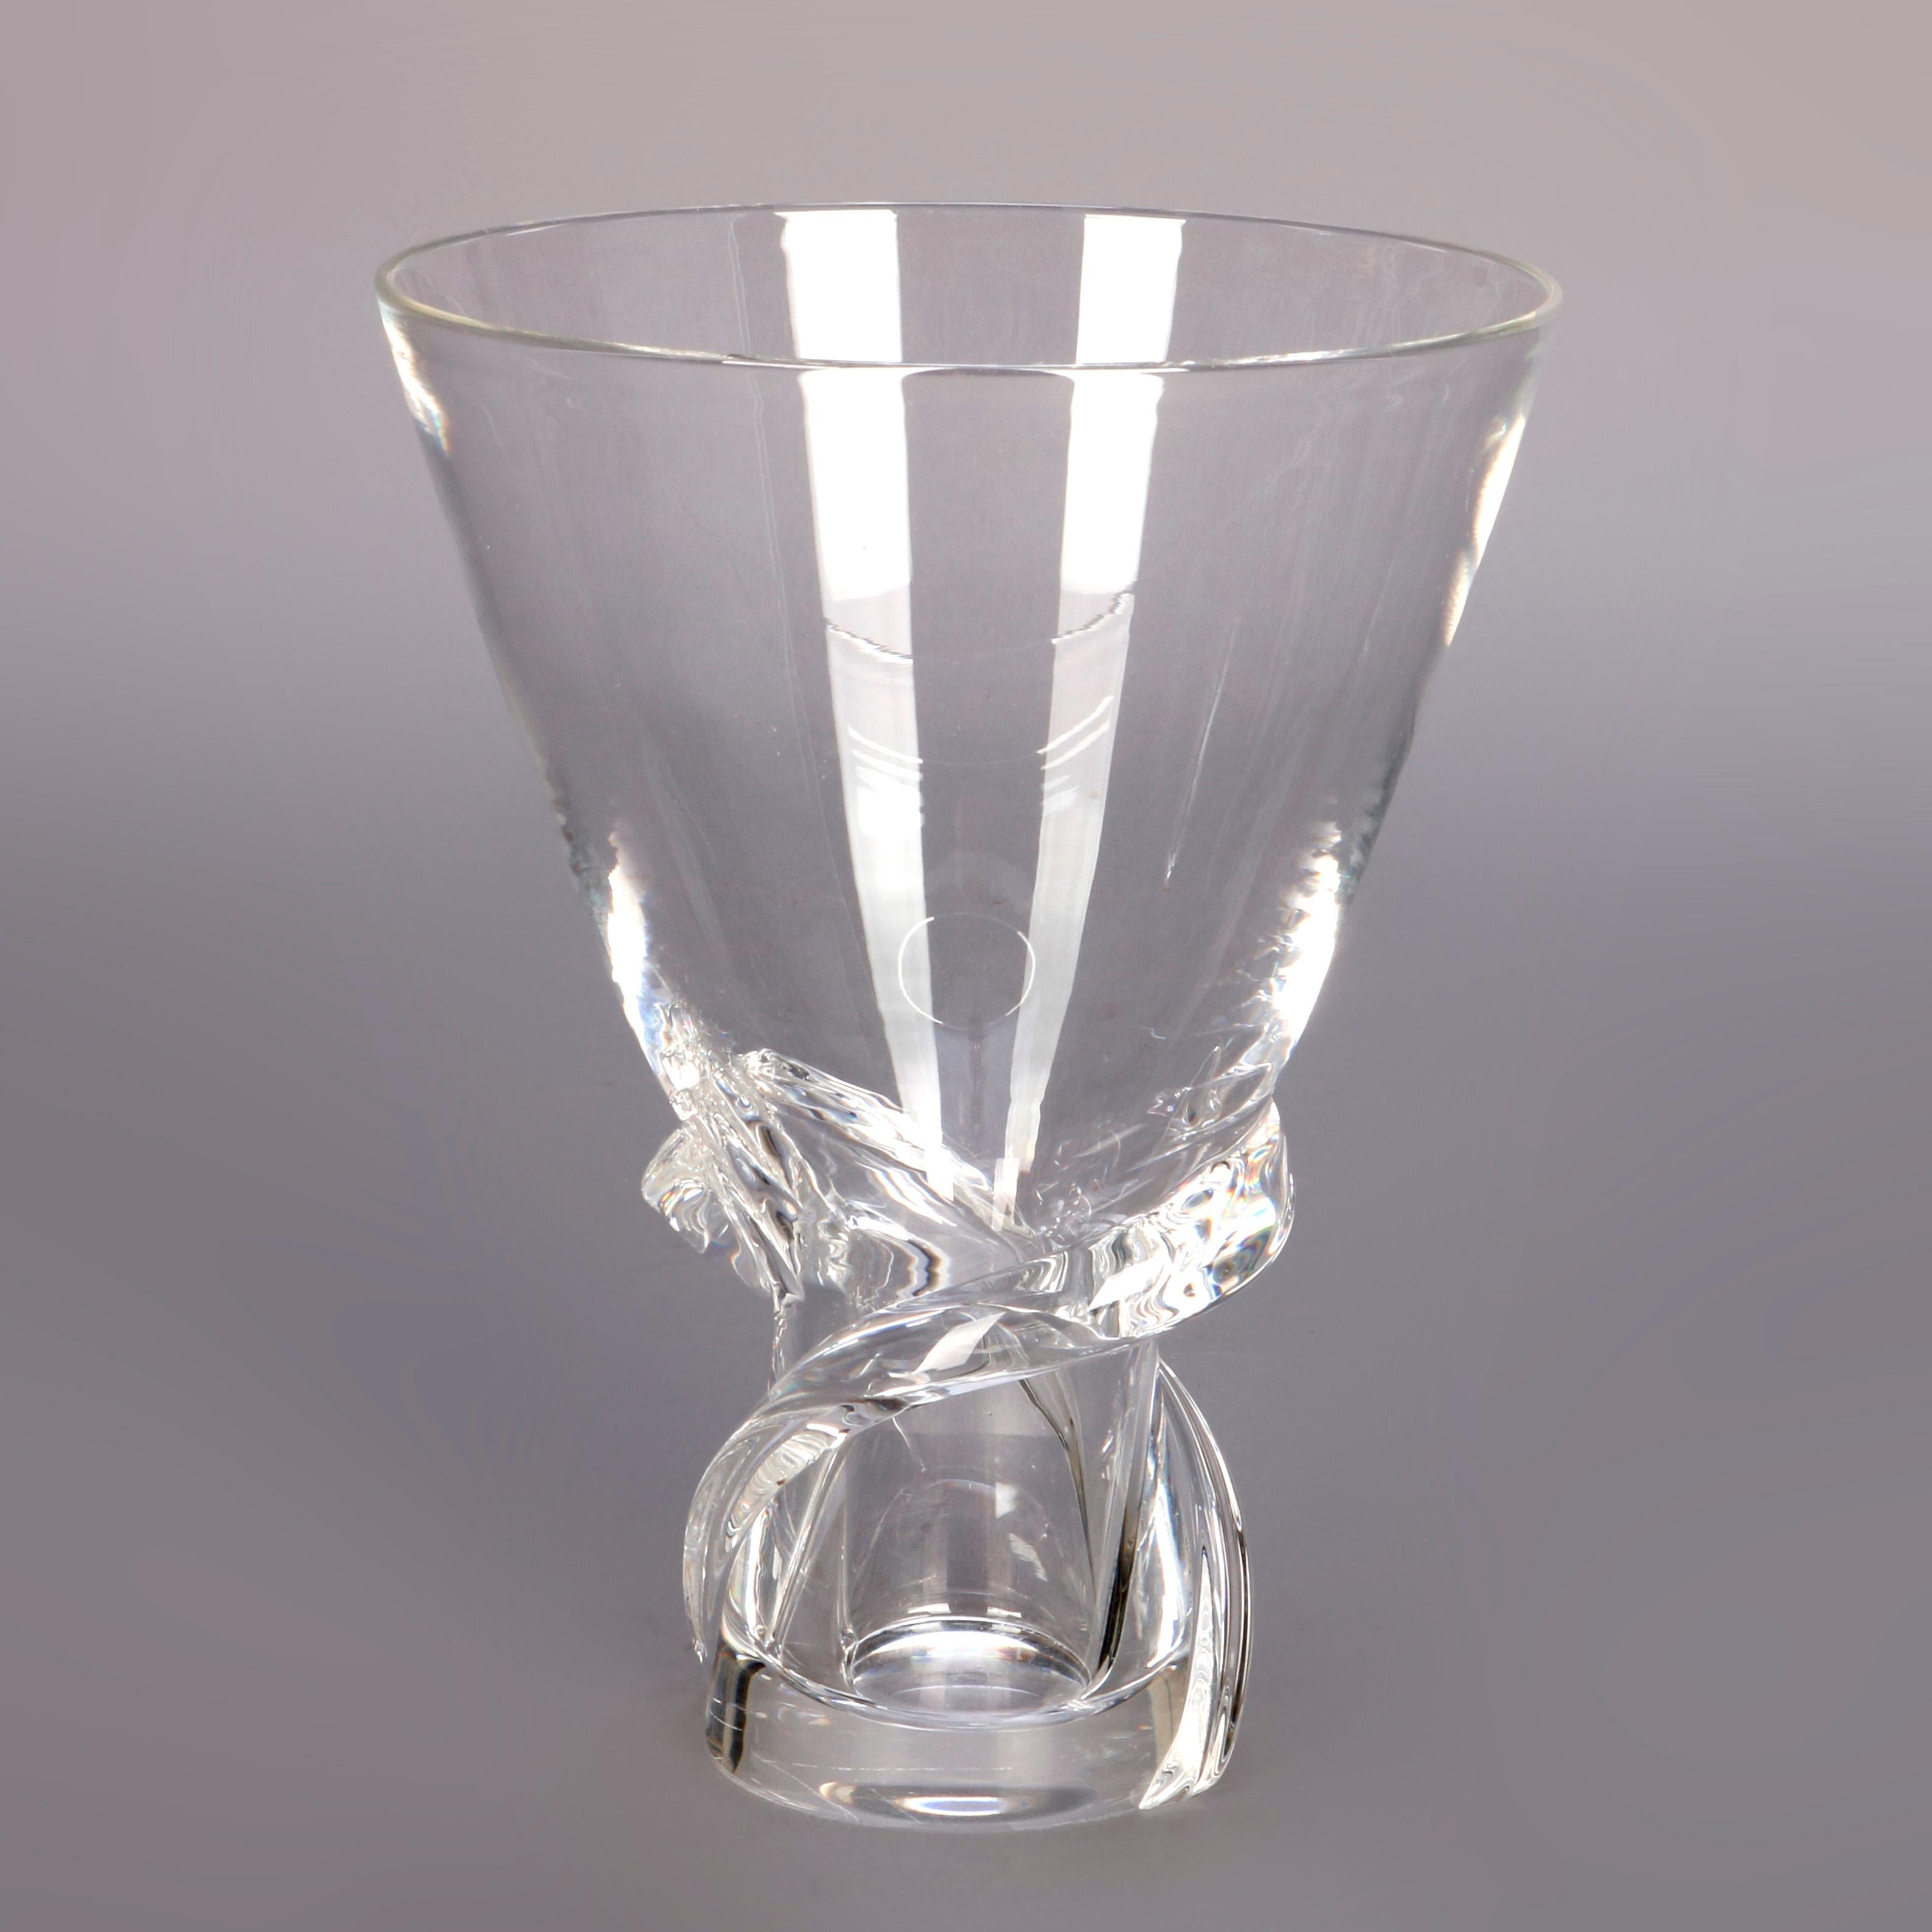 A Mid-Century Modern colorless crystal vase by Steuben Glass Works offers flared form with applied twist element on base, signed as photographed and with box 20th century.

***DELIVERY NOTICE – Due to COVID-19 we are employing NO-CONTACT PRACTICES